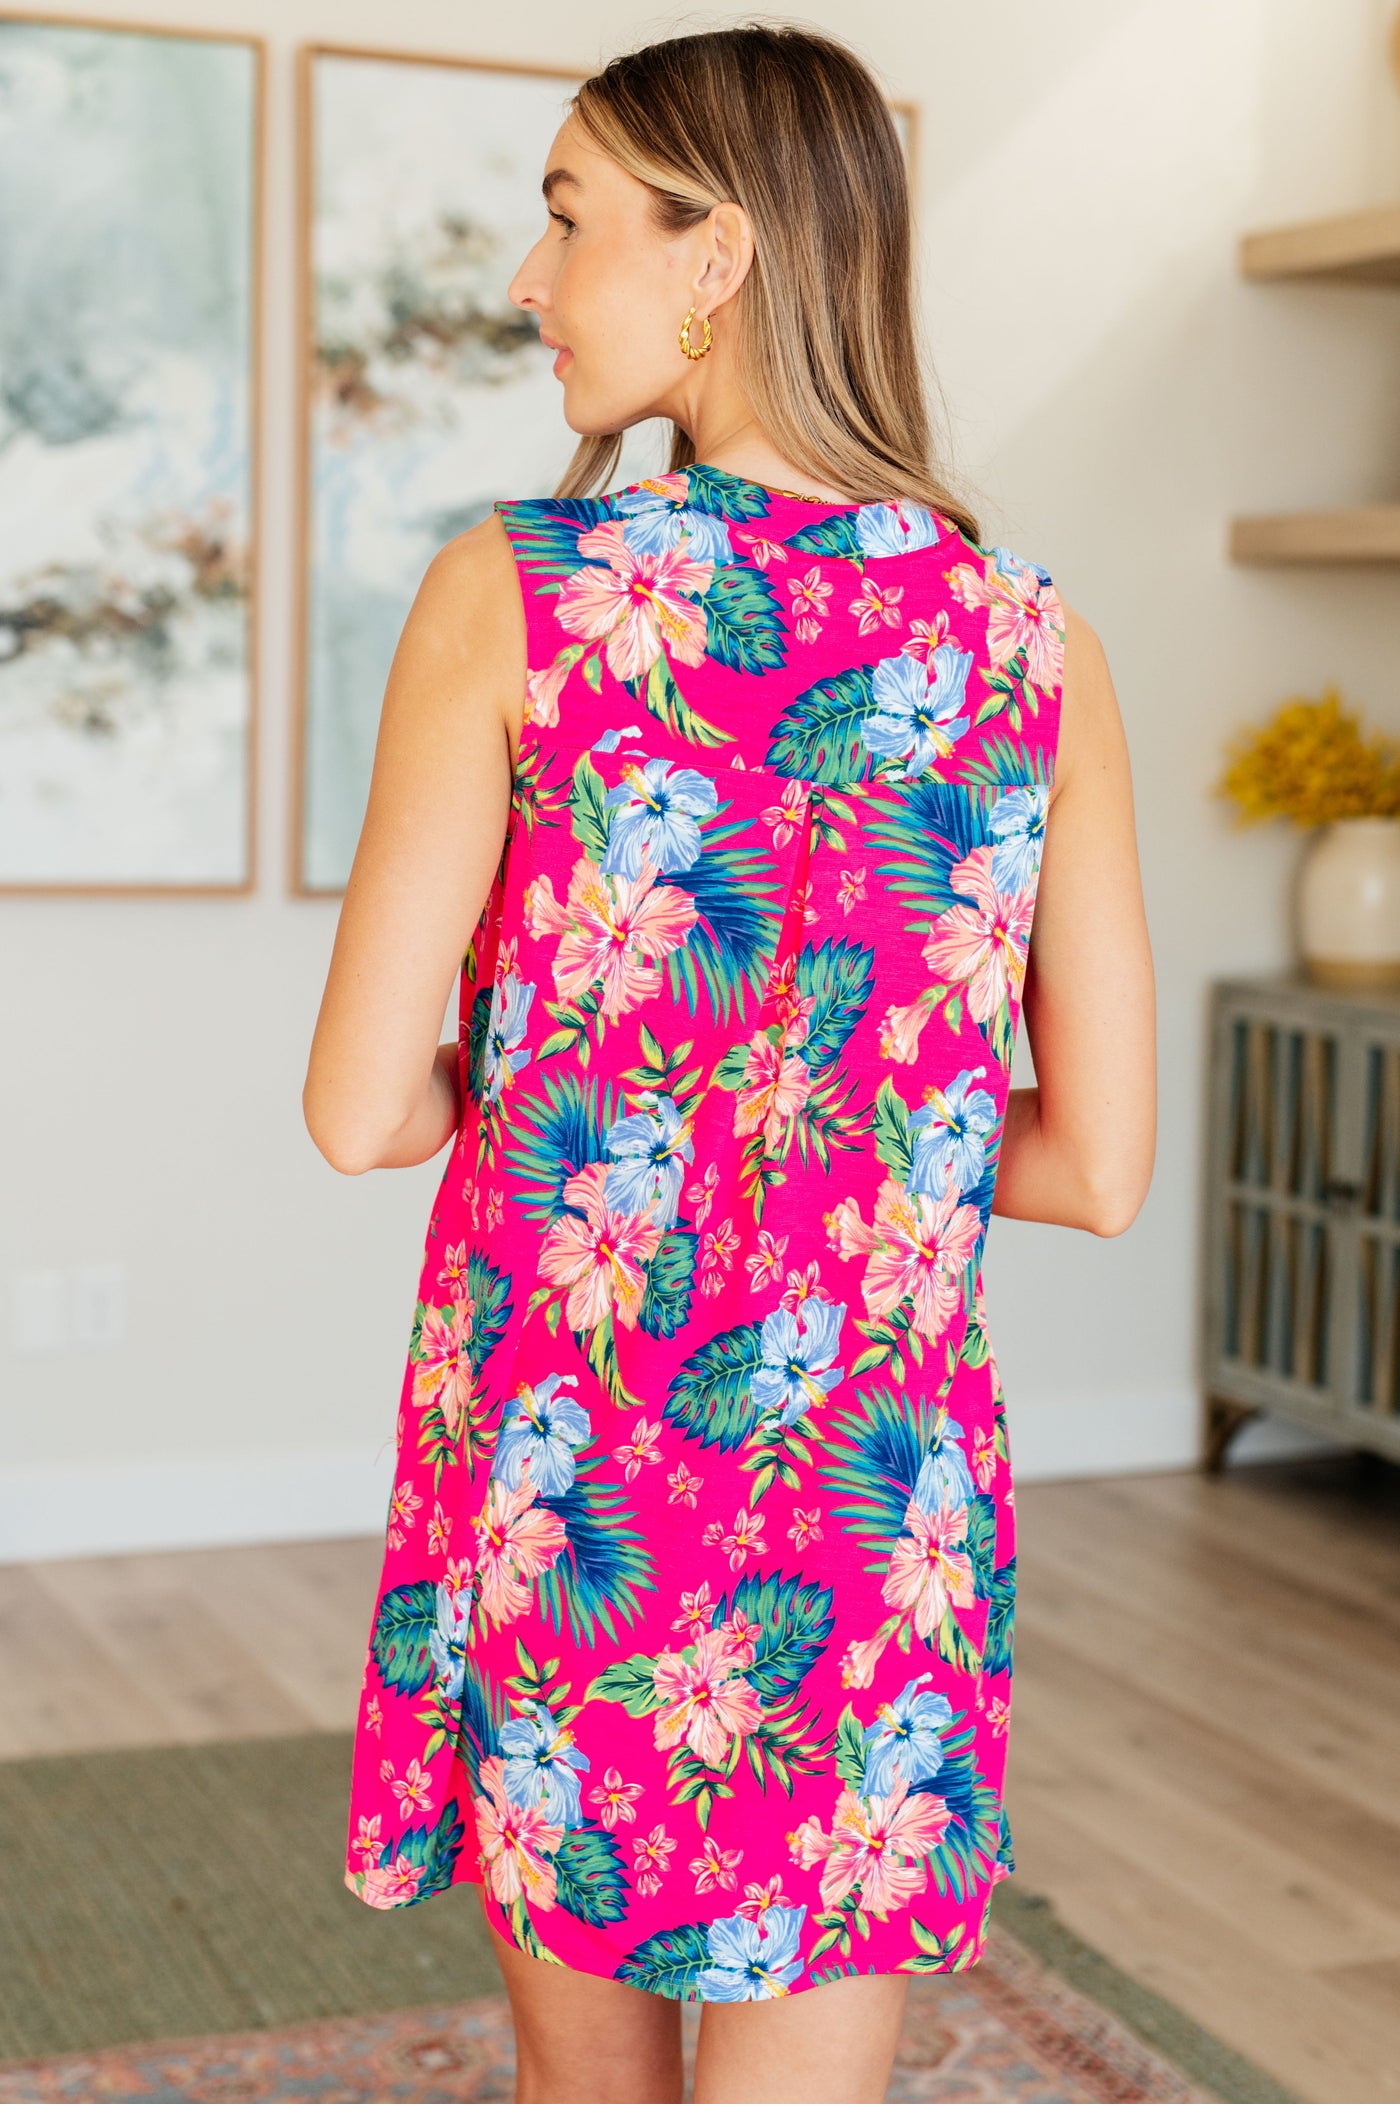 Lizzy Tank Dress in Hot Pink Tropical Floral|Corner Stone Spa Boutique-Dresses- Corner Stone Spa and Salon Boutique in Stoughton, Wisconsin